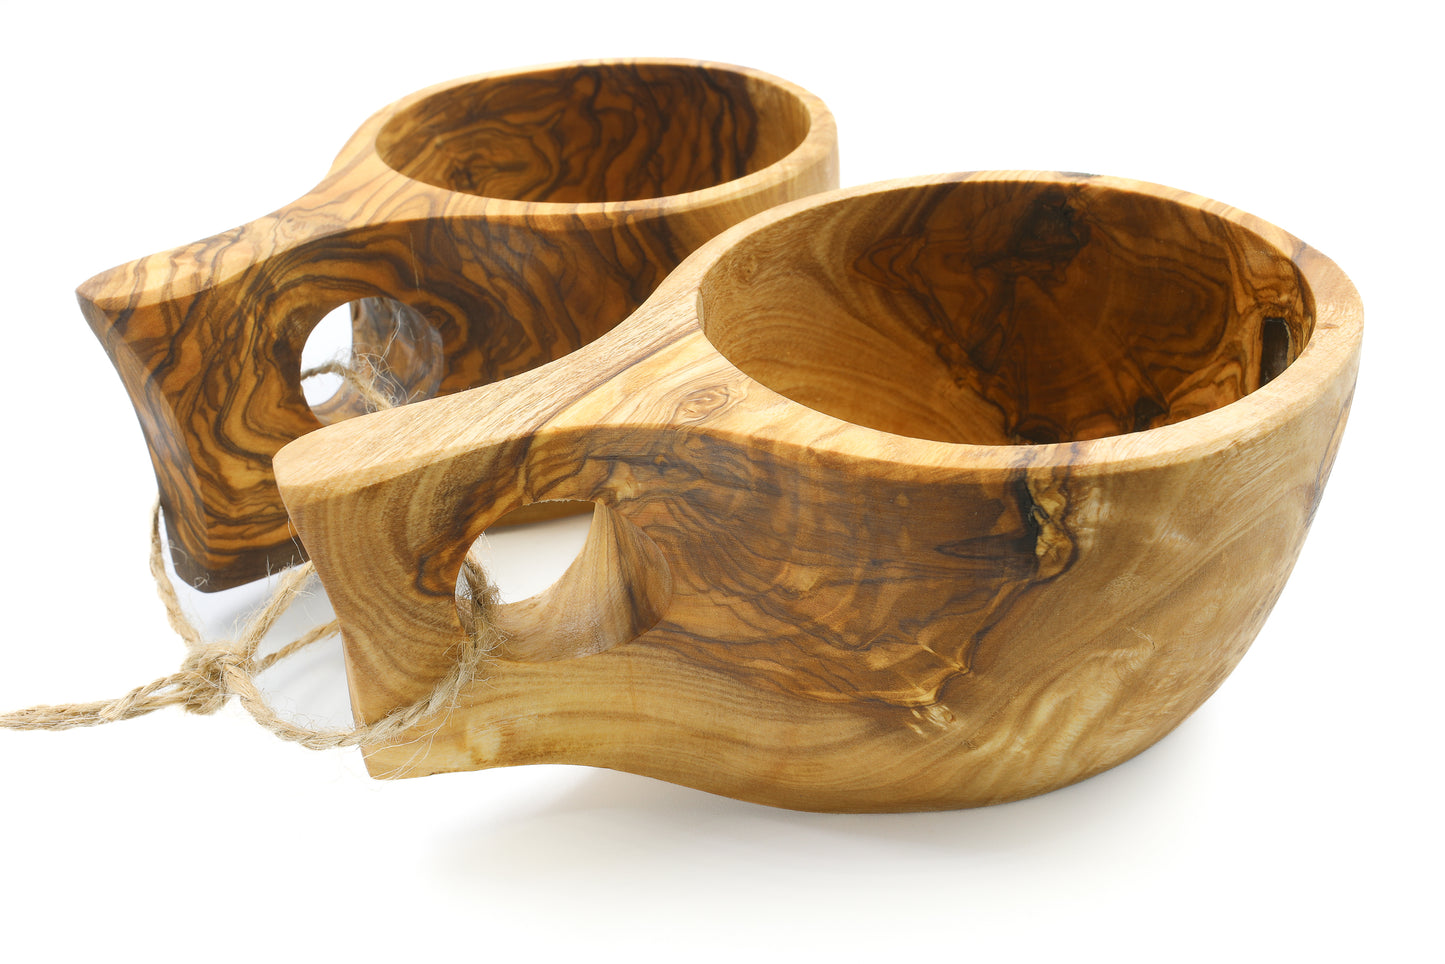 Unique handmade kuksa for sipping your favorite beverages